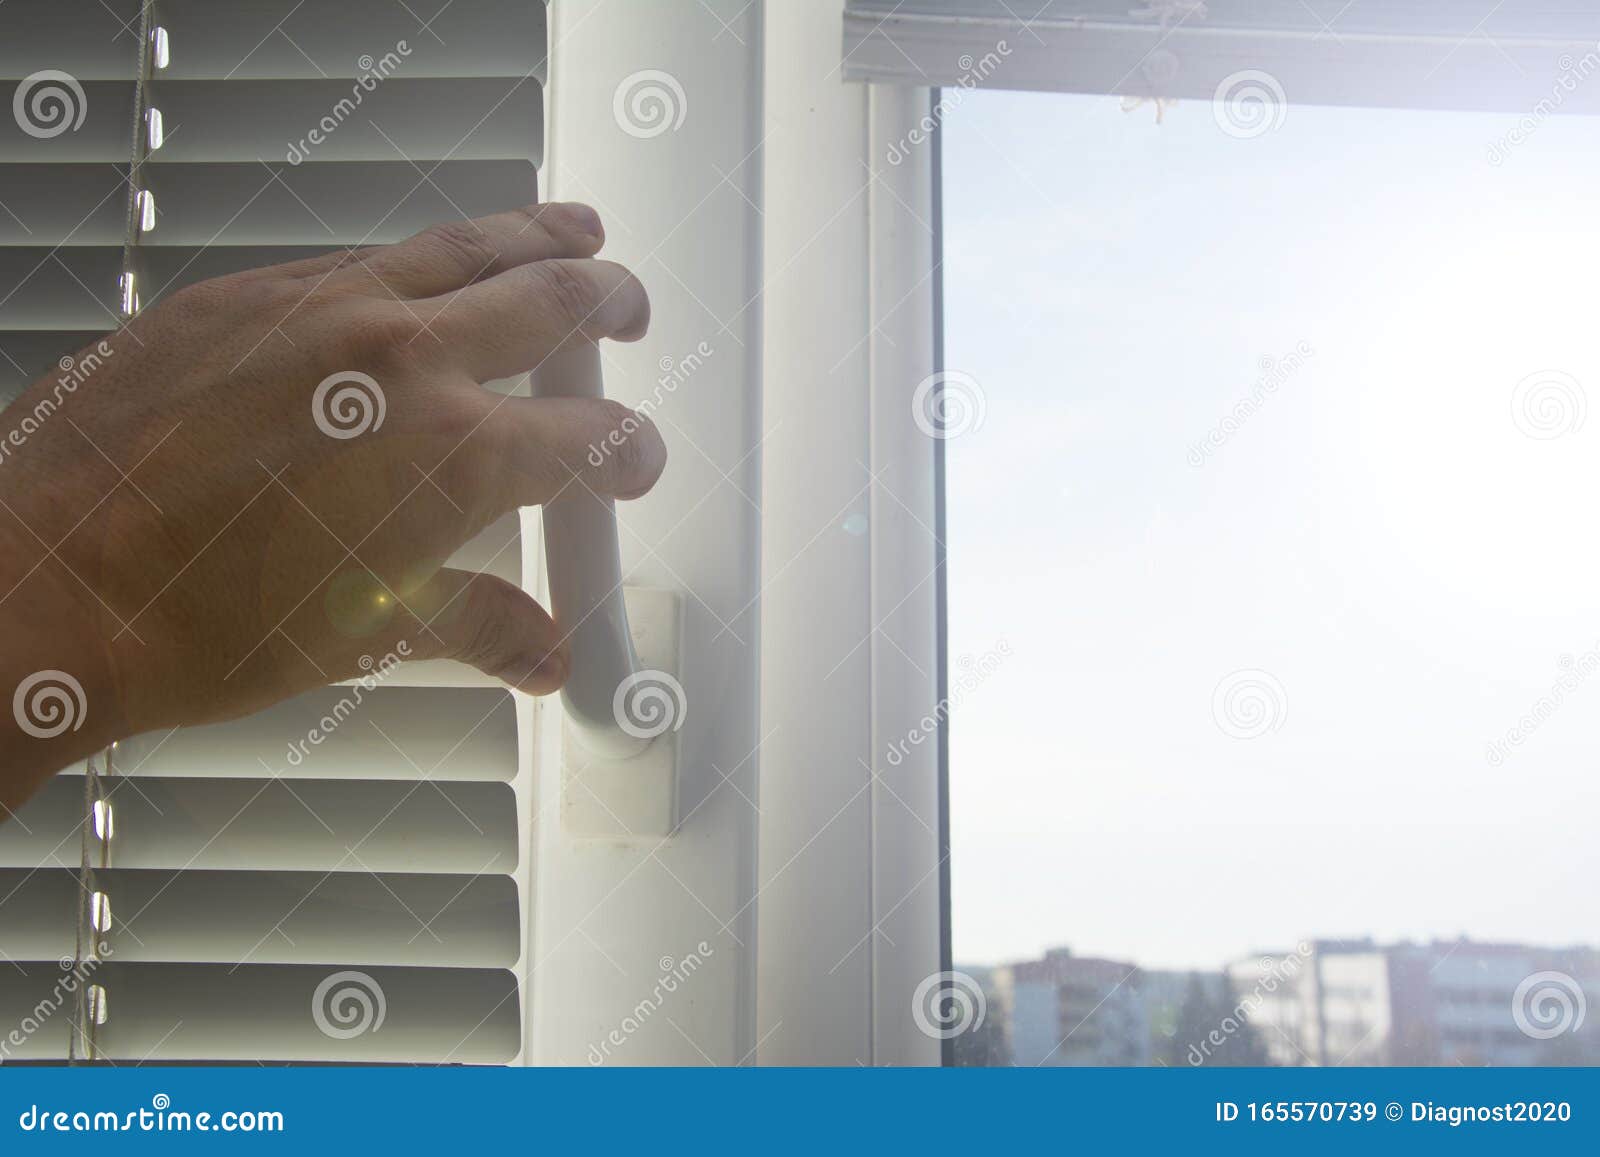 A Young Man Closes Or Opens Window With Lowered Horizontal White ... Open Window At Morning